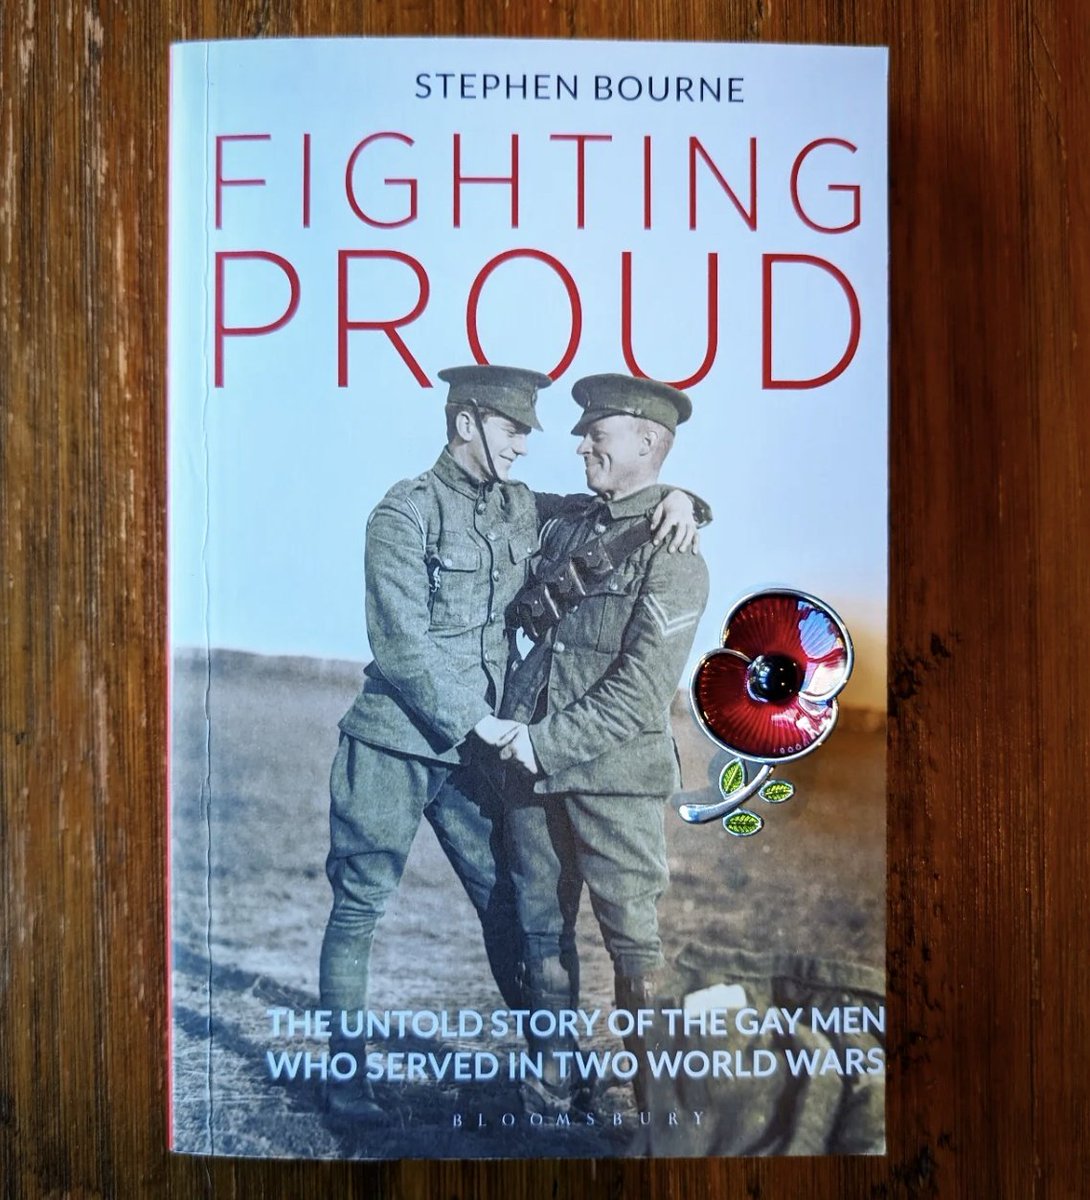 Remember everyone, including those often left out of history #RemembranceDay #ArmisticeDay #queerhistory #lgbtqhistory #gayhistory @BloomsburyBooks